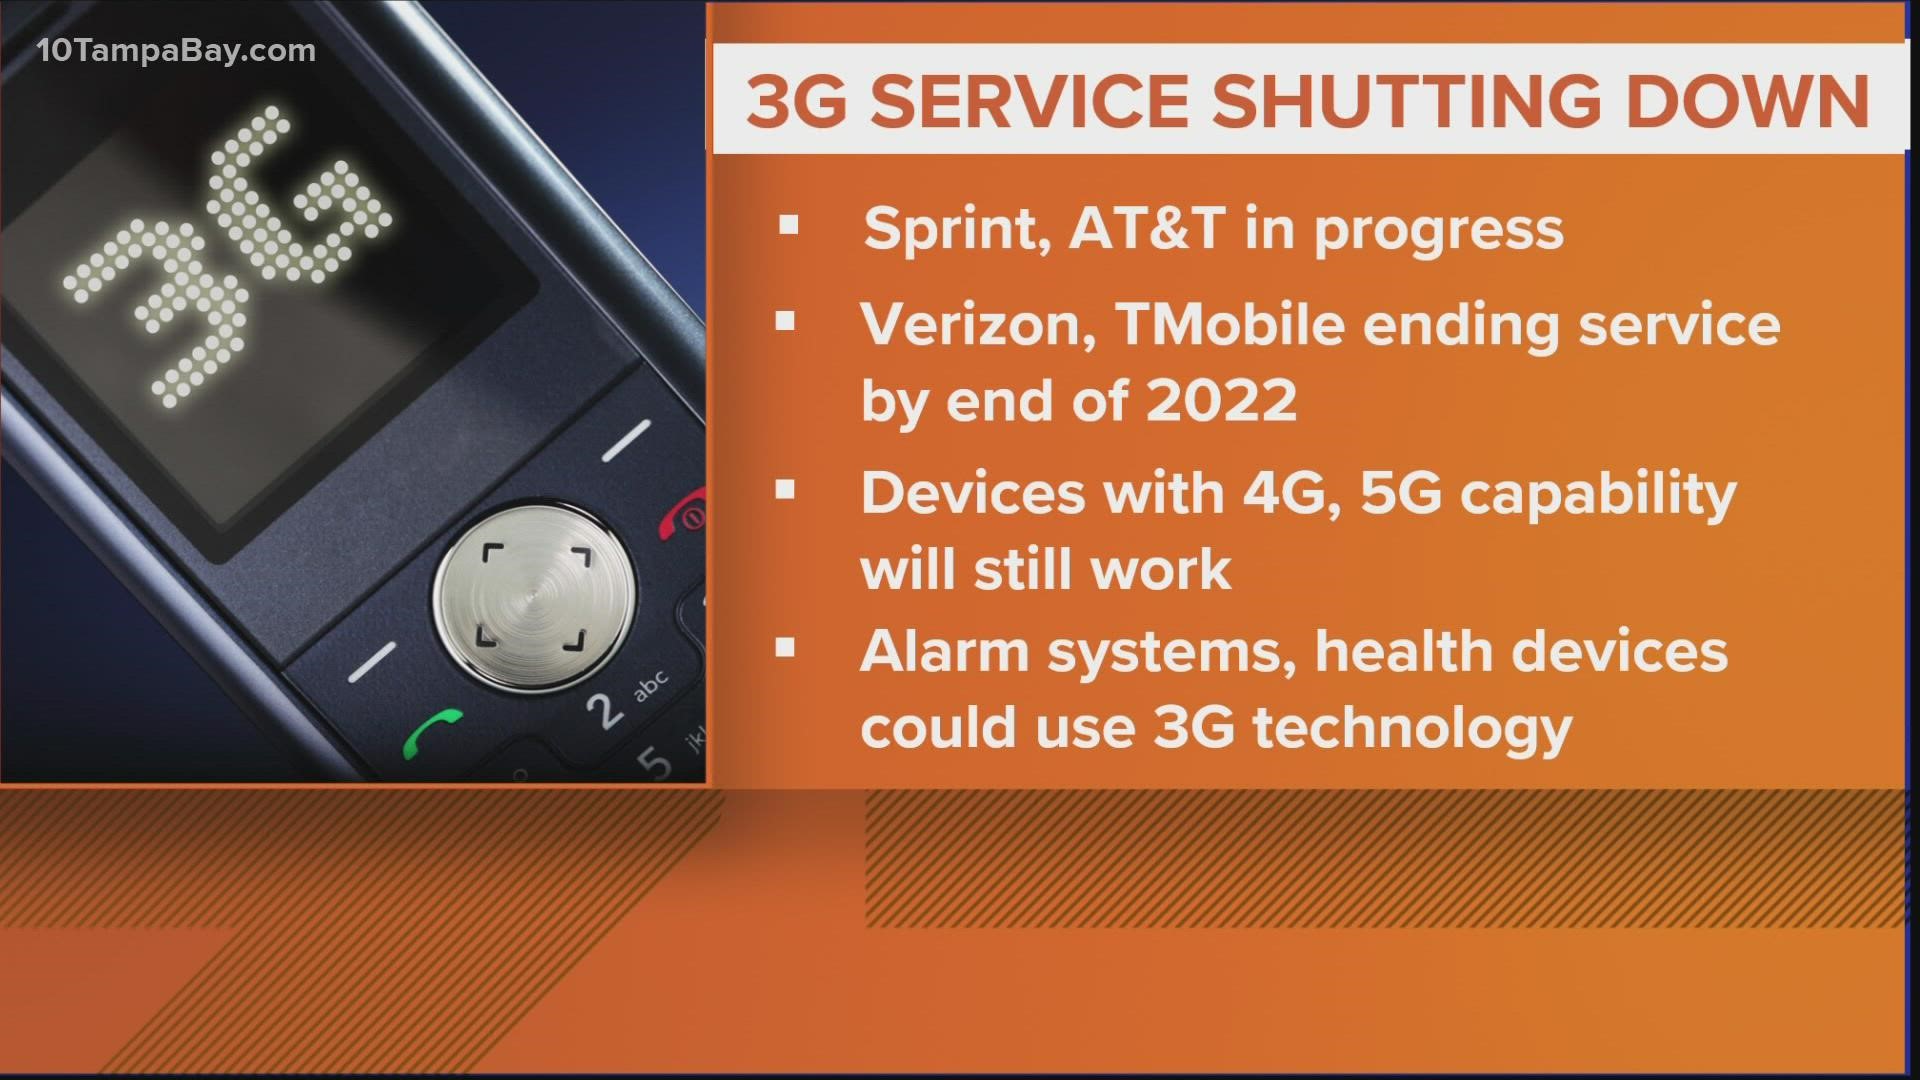 The largest three American mobile providers are all phasing out their 3G networks in 2022, meaning customers will need 4G or 5G phones to continue receiving service.